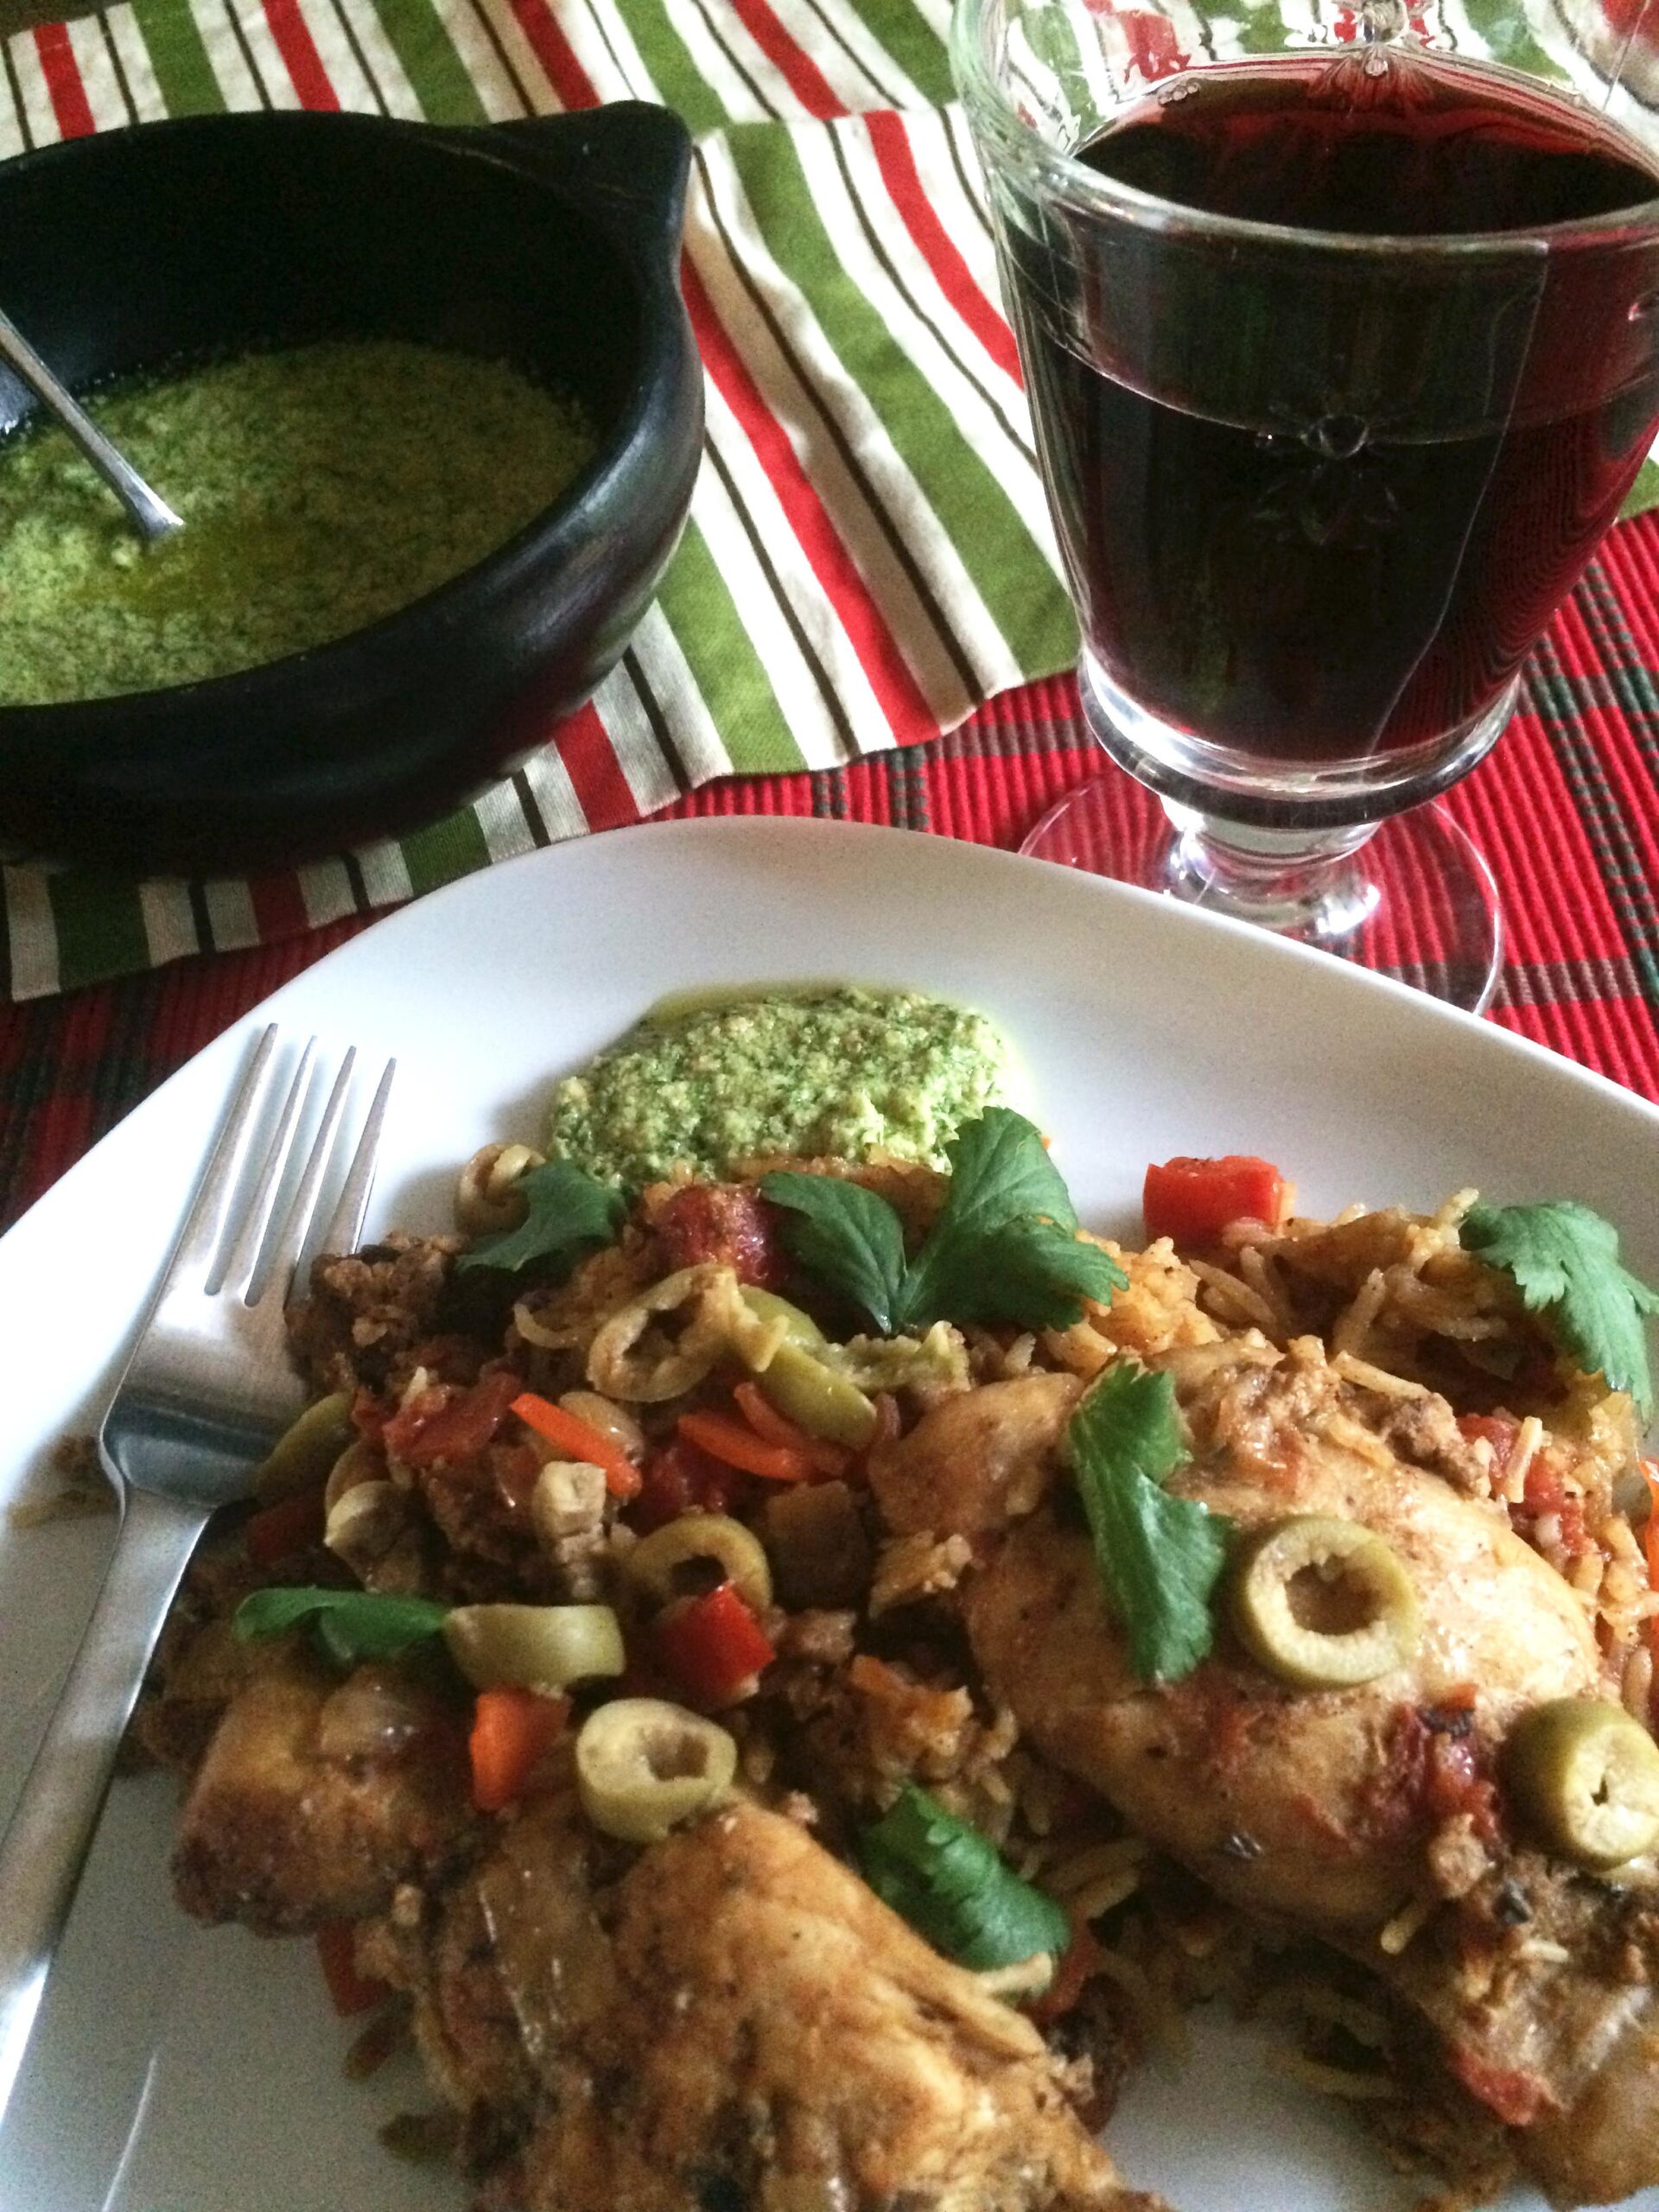  From stove to table, this Arroz con Pollo with Salsa Verde recipe is a quick and easy dinner option.